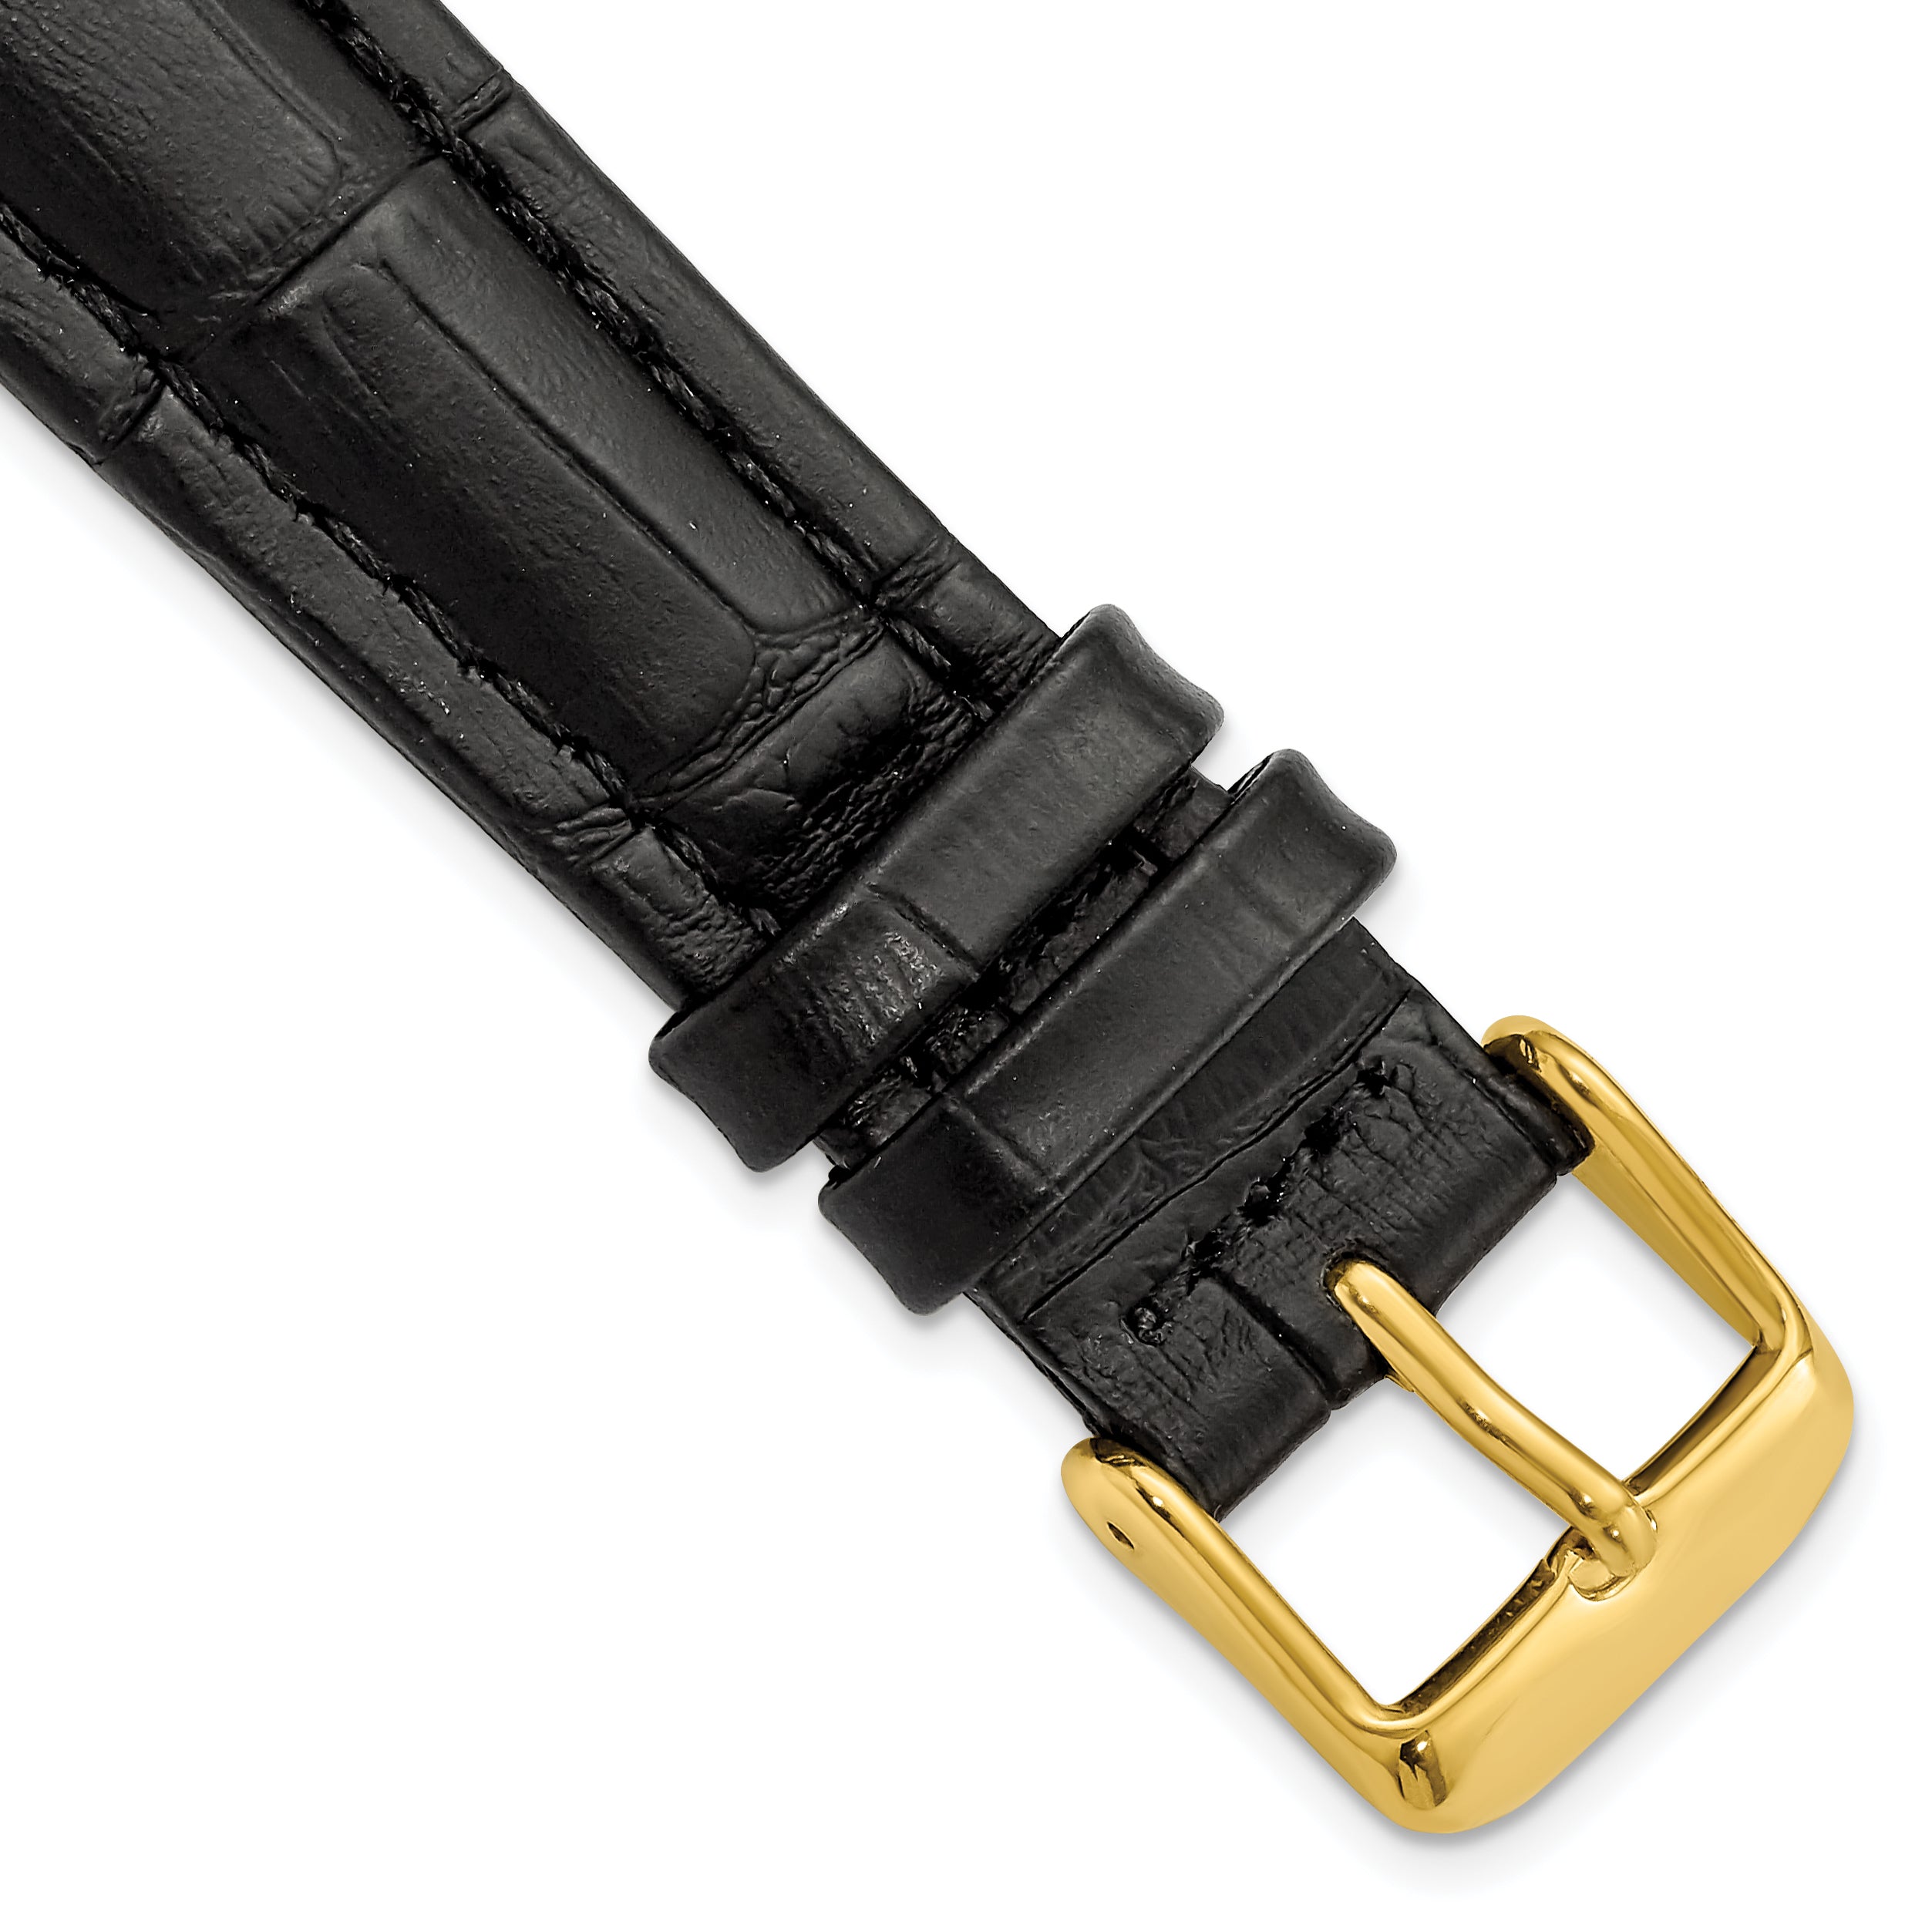 DeBeer 19mm Black Matte Alligator Grain Leather with Gold-tone Buckle 7.5 inch Watch Band